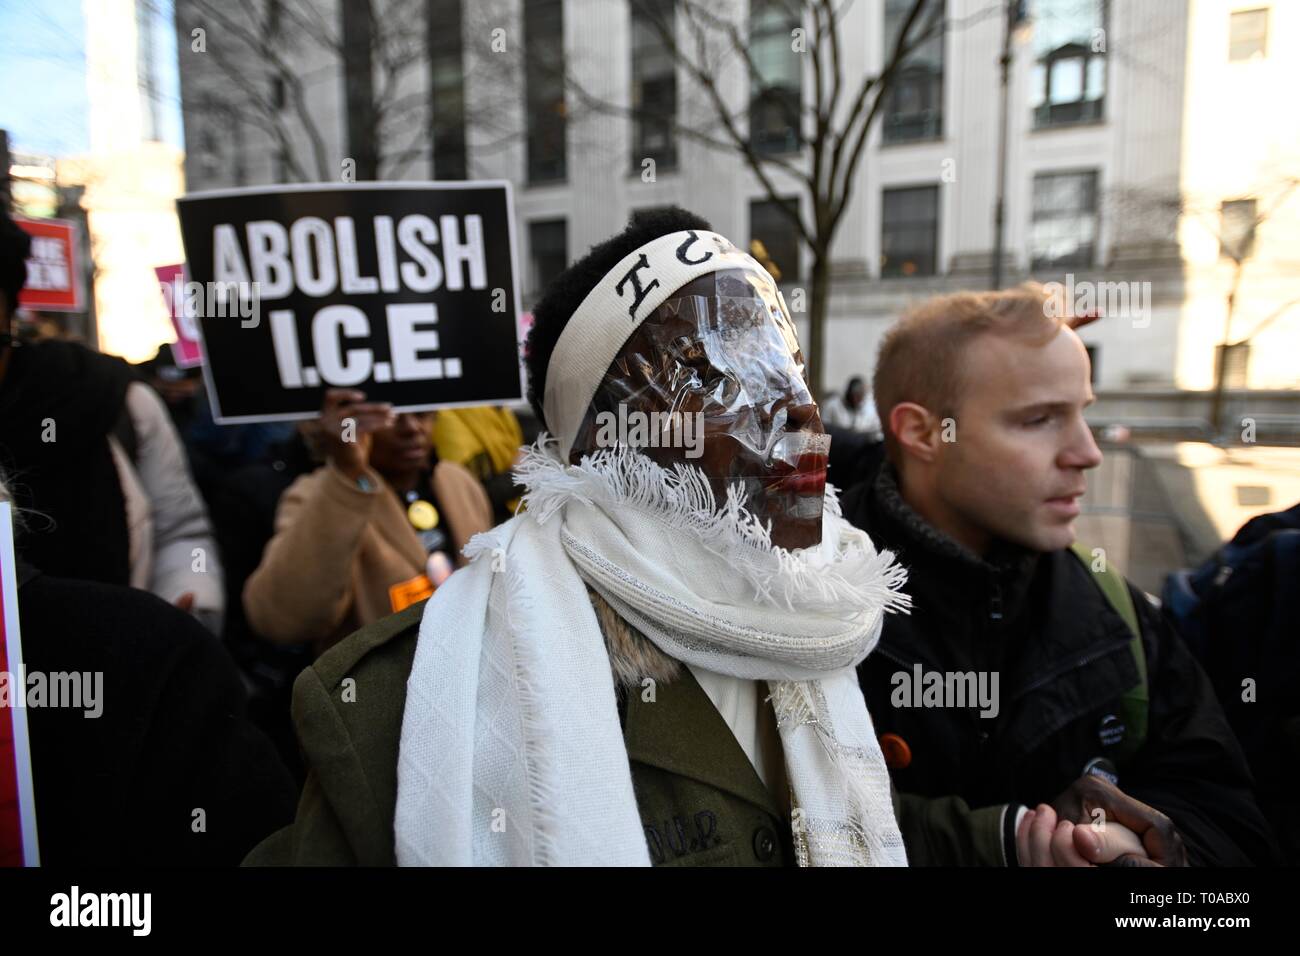 New York, NY, USA. 19th Mar 2019.  Supporters escort Statue of Liberty climber Patricia Okoumou, with clear plastic covering her face, into federal court before her sentencing for her July 4, 2018, act of civil disobedience to protest against Trump administration immigration policies.  Okoumou was convicted in December of misdemeanor charges of trespassing, disorderly conduct, and interfering with the functioning of government. Credit: Joseph Reid/Alamy Live News Stock Photo